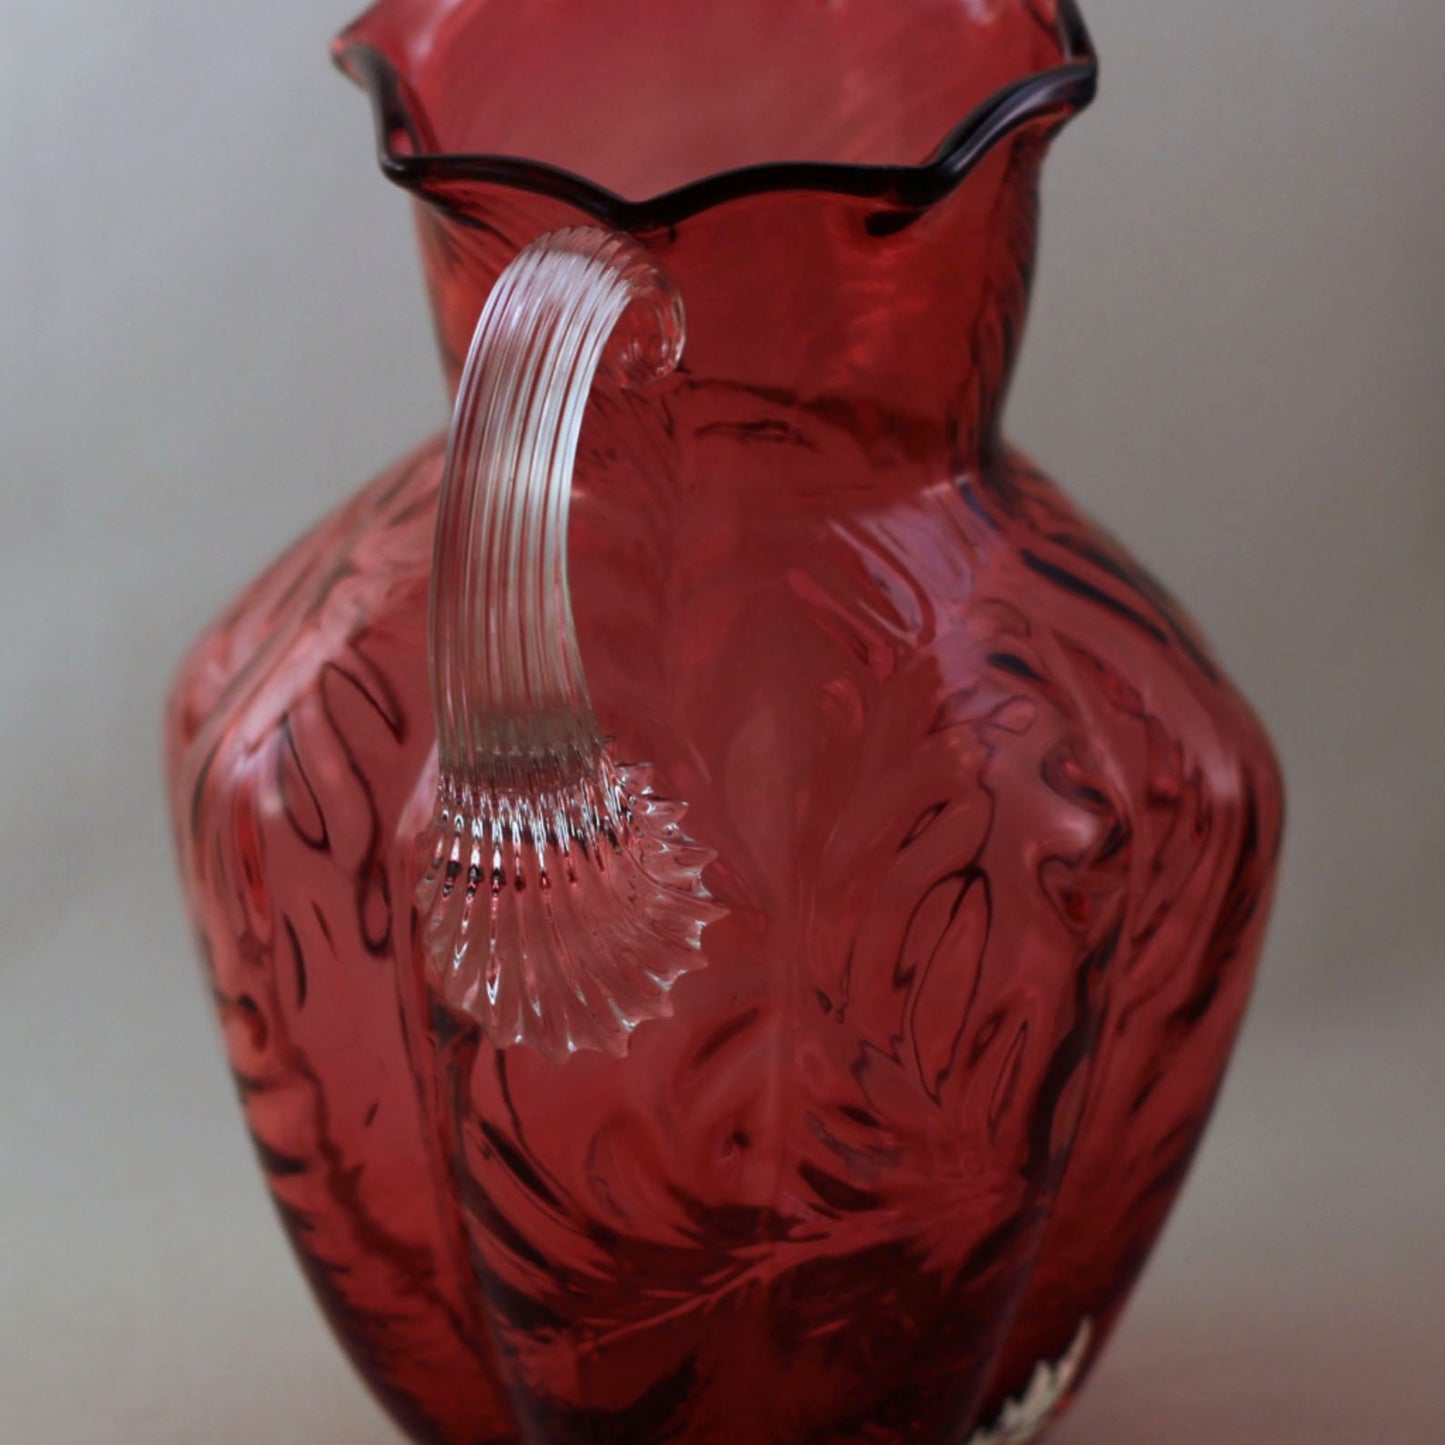 FENTON CRANBERRY GLASS Pitcher with Embossed Fern Design and Reed Design Handle